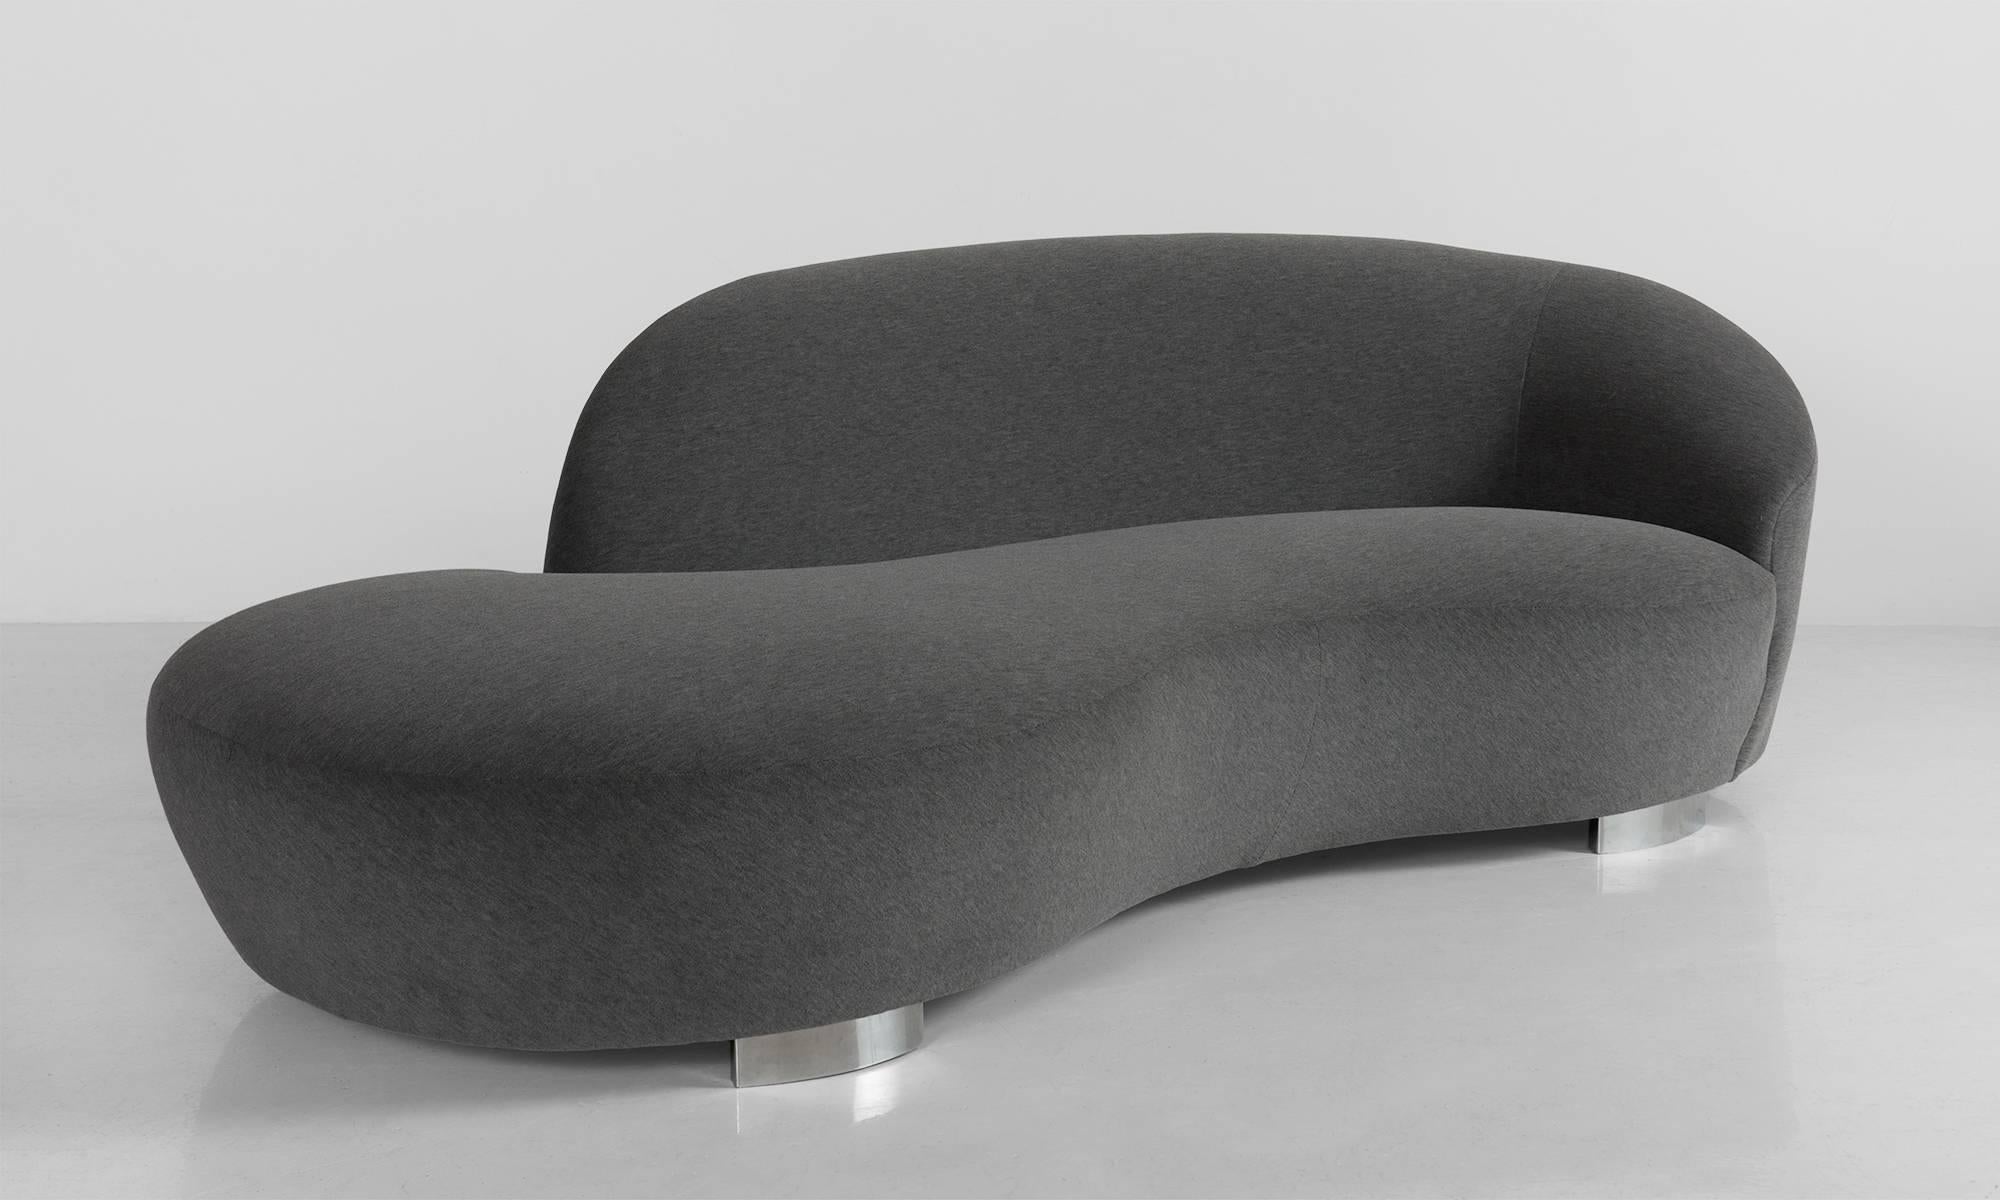 "Tango II" Sofa no. M760 made by Lazar Industries. Designed in the iconic style of Vladimir Kagan's 'Cloud' Sofa for Directional. 
Newly reupholstered in luxurious Alpaca Mohair by Maharam, on chrome base.